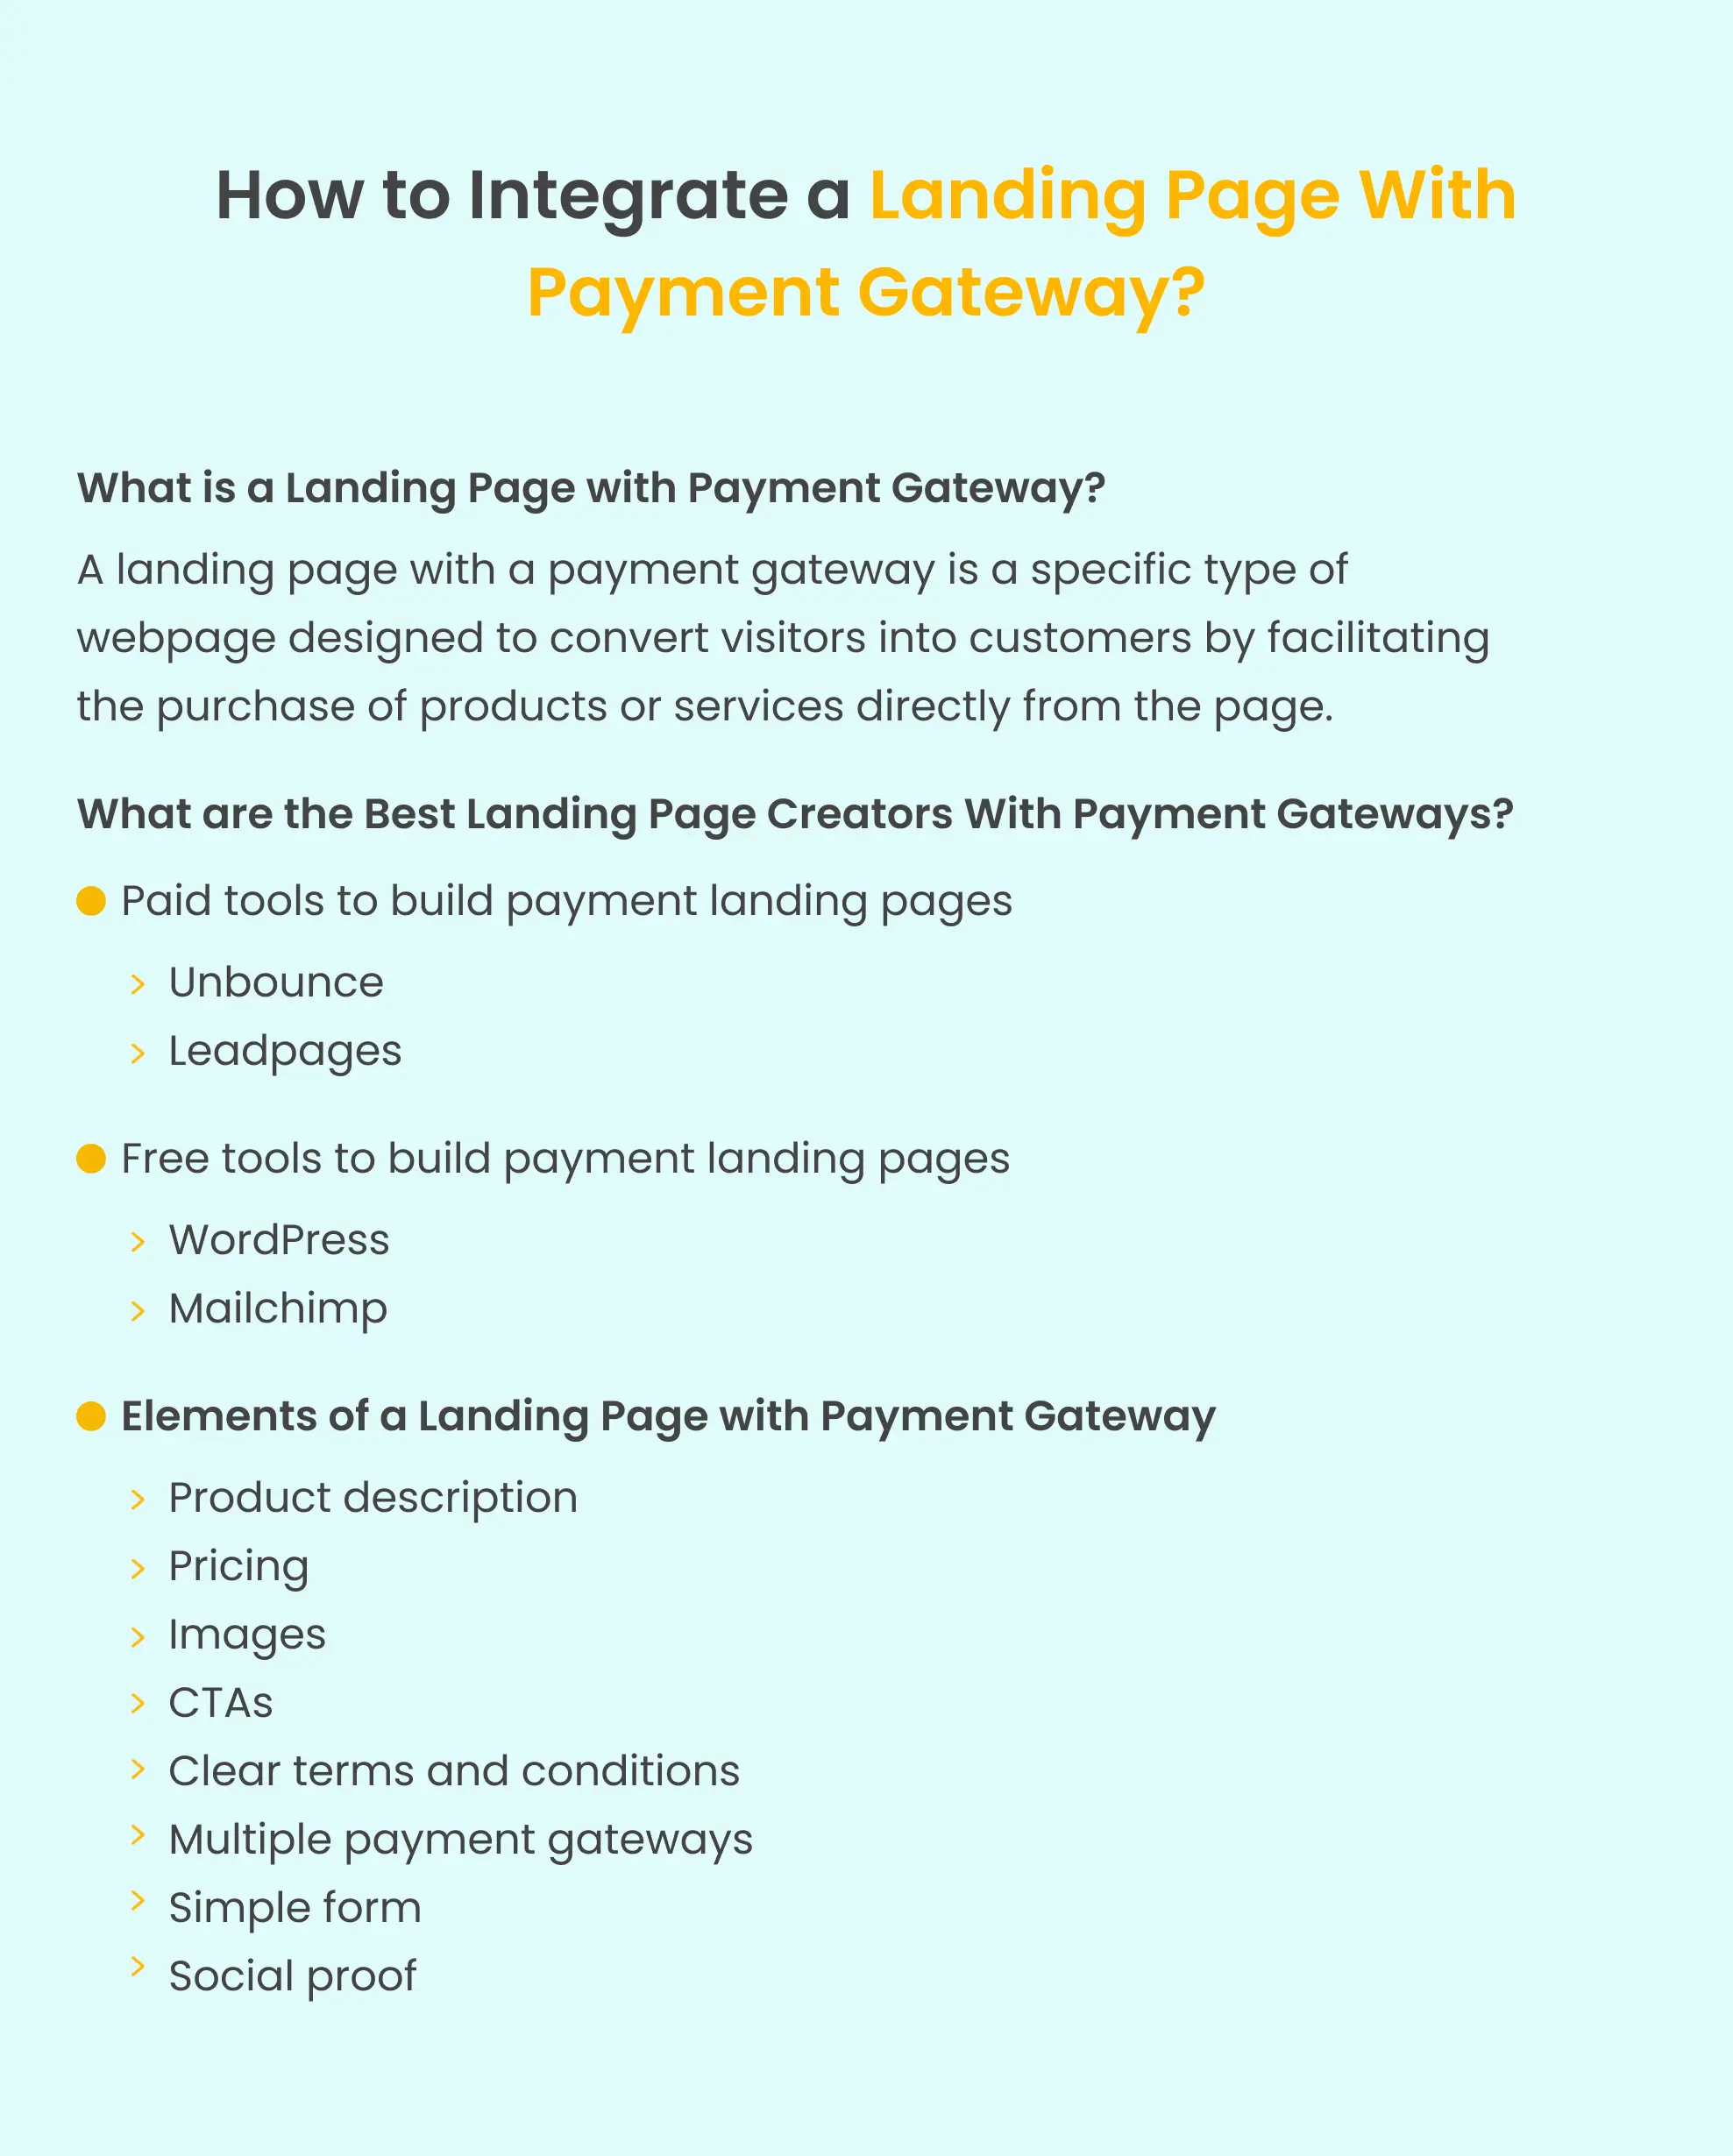 landing-page-with-payment-gateway-summary-9e65f3.webp